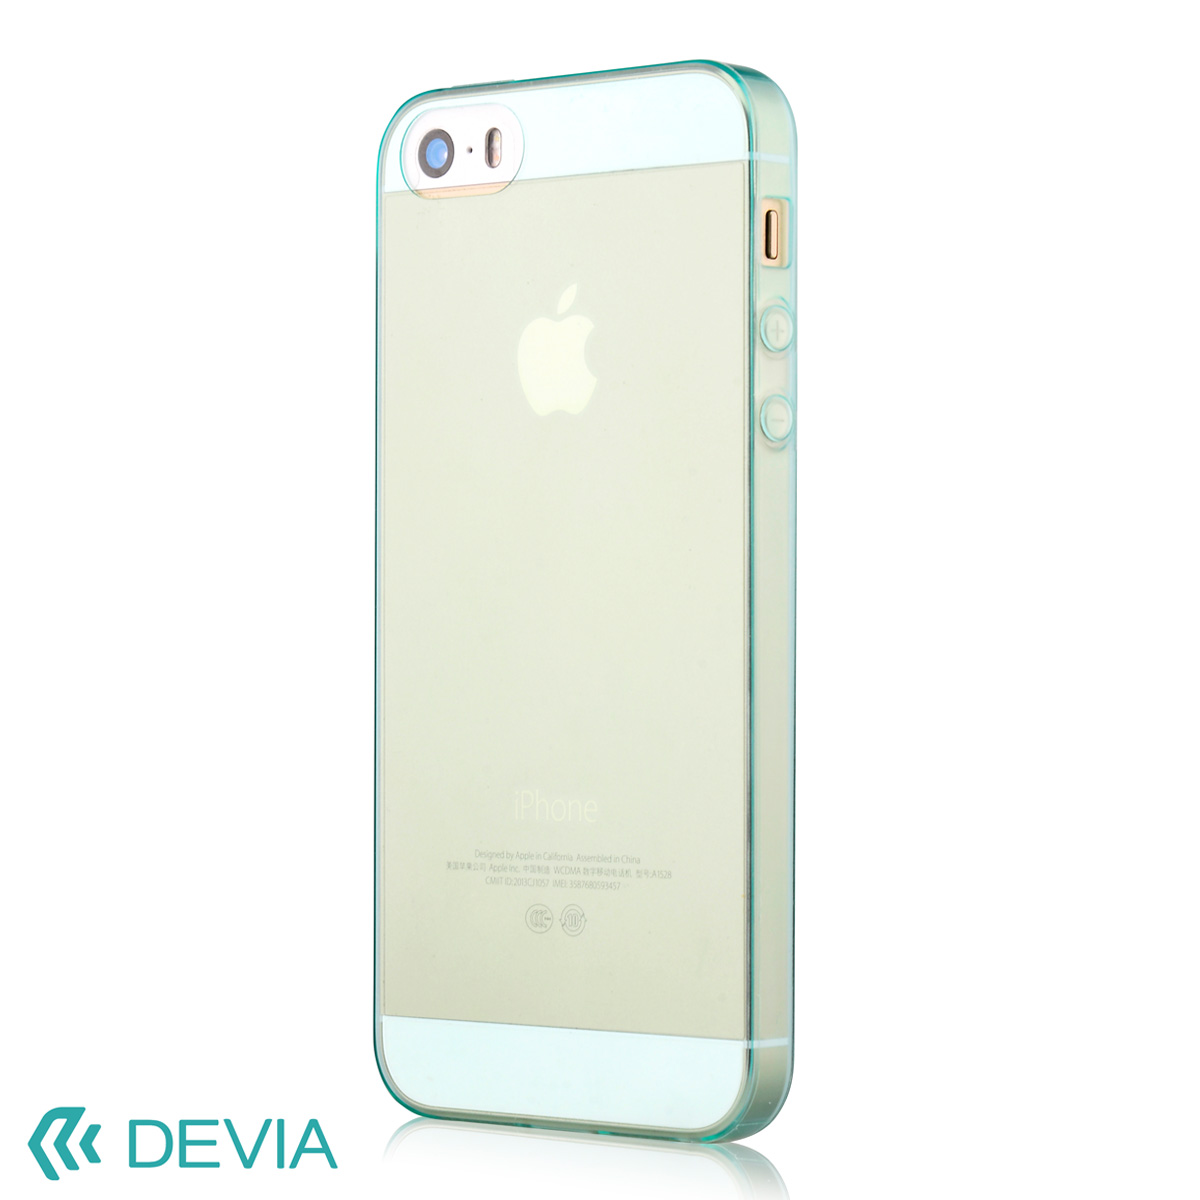 Iphonese 5s 5用 0 5mm極薄 本体との一体感が抜群のtpuケース Devia Naked For Iphonese レイクブルー Bldv 128 Bl Belex Collection